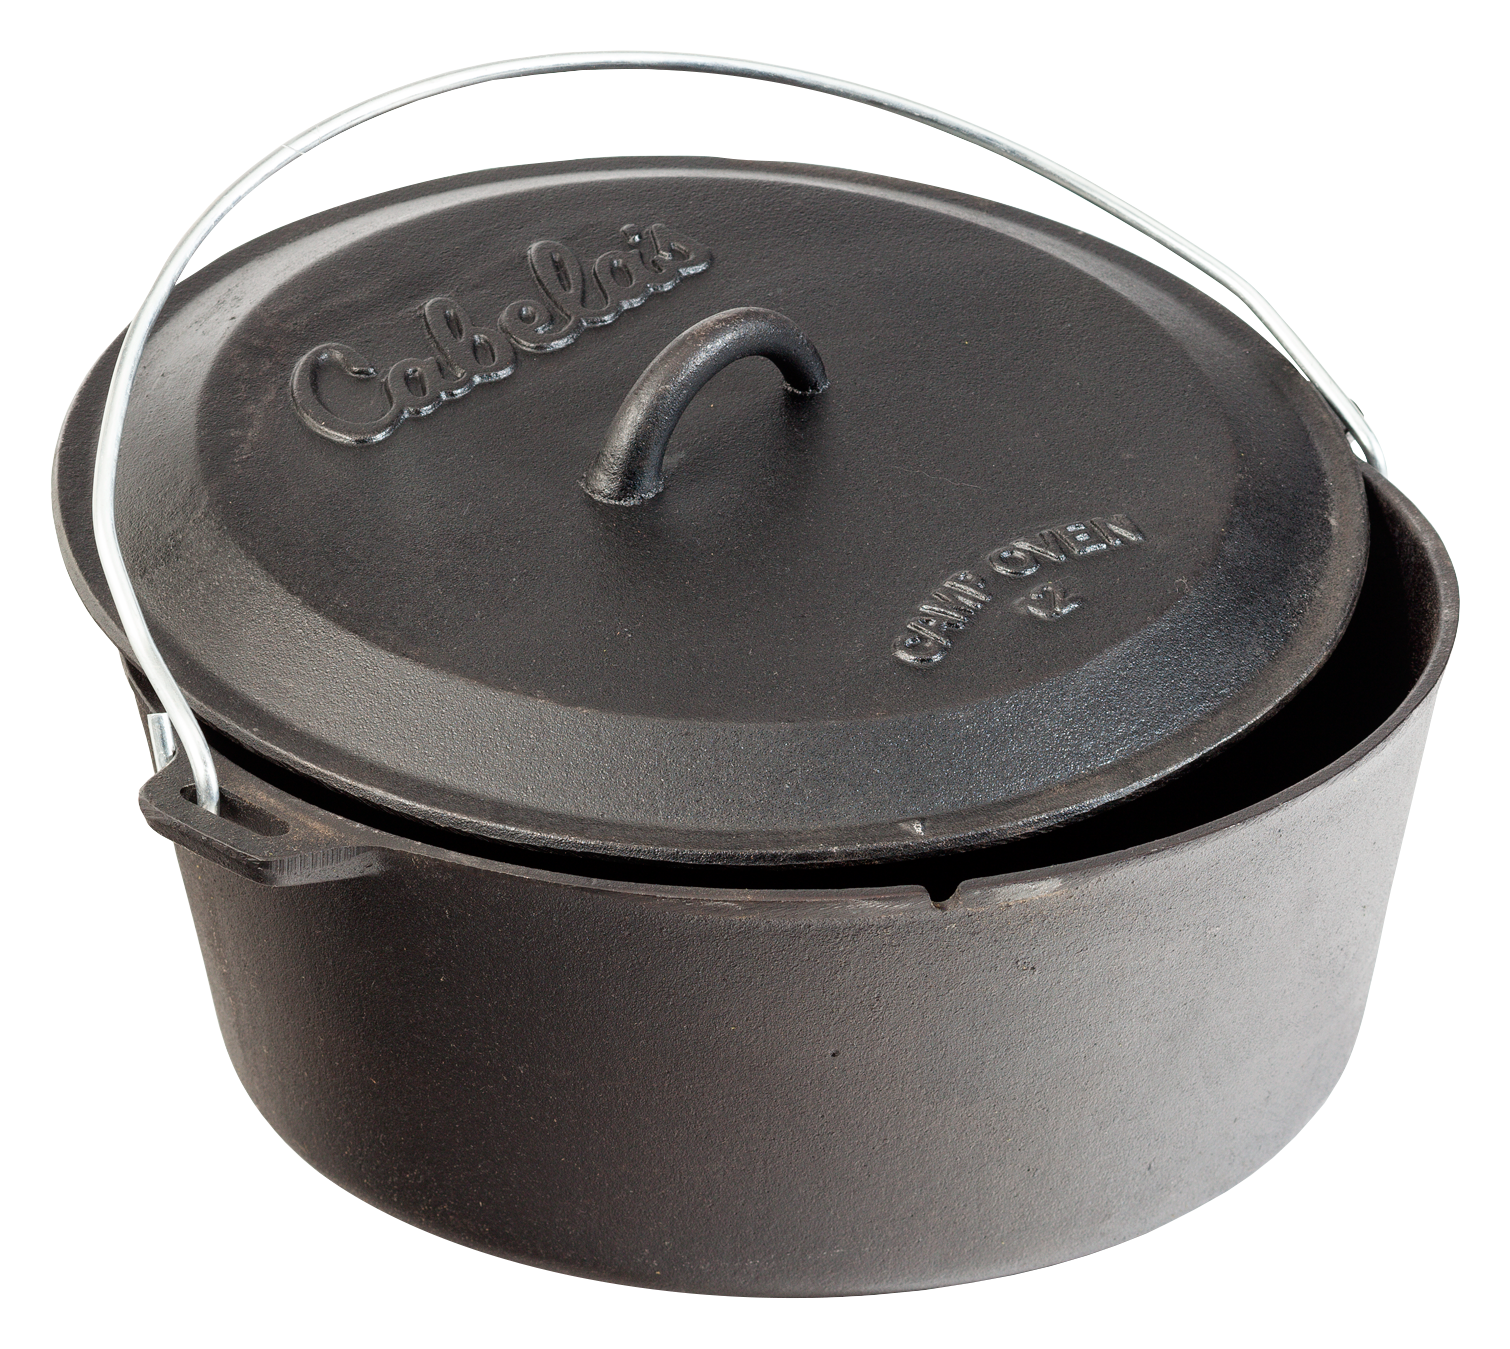 Lodge 9 Quart Cast Iron Dutch Oven. Pre Seasoned Cast Iron Pot and Lid with  Wire Bail for Camp Cookin - - Outdoor Home Store